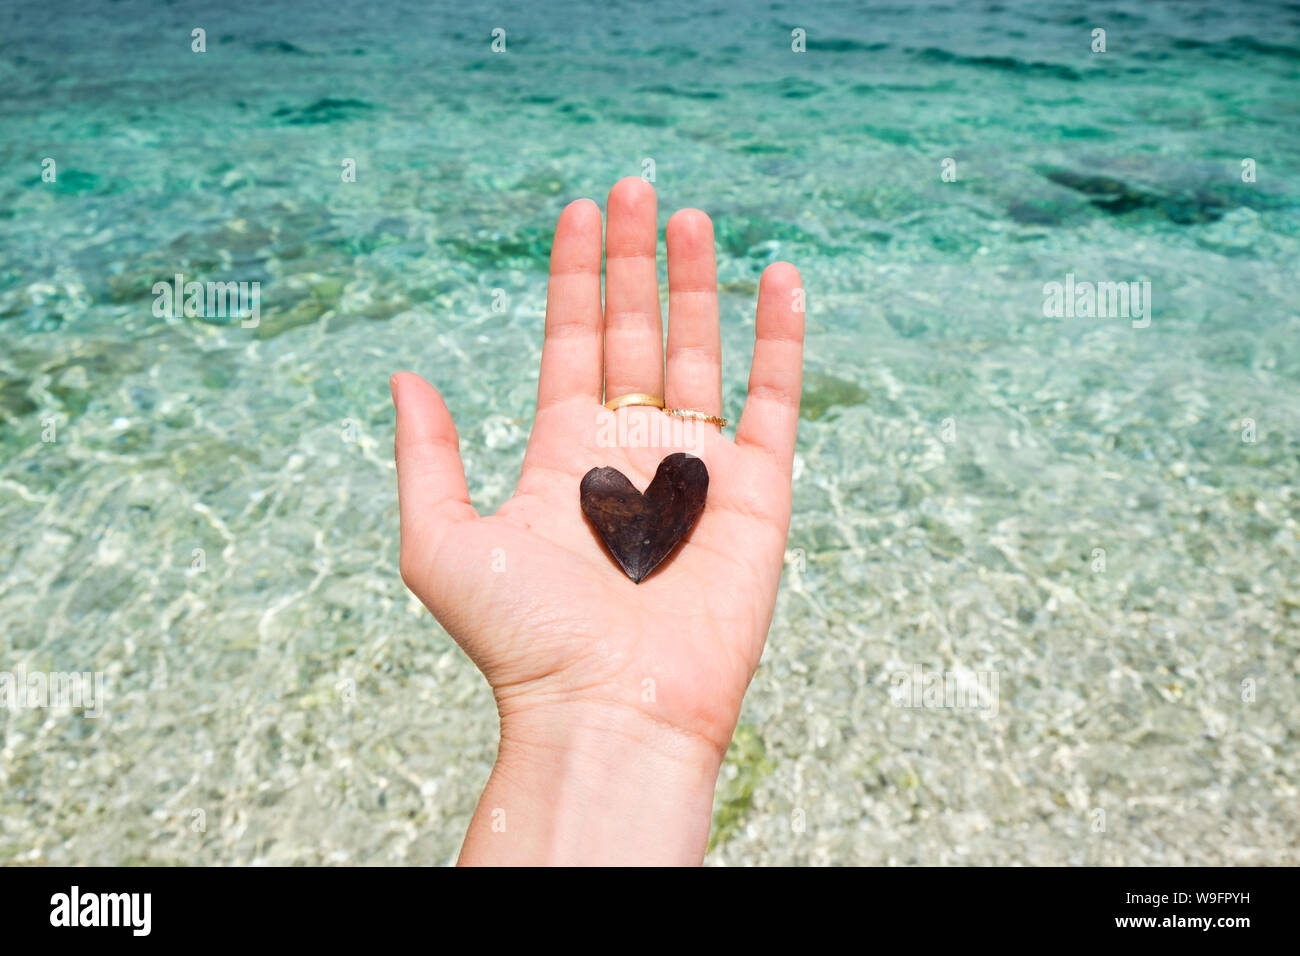 A hand holds a heart-shaped leaf in front of the turquoise water of the Ionian Sea in Kefalonia, Greece. Stock Photo